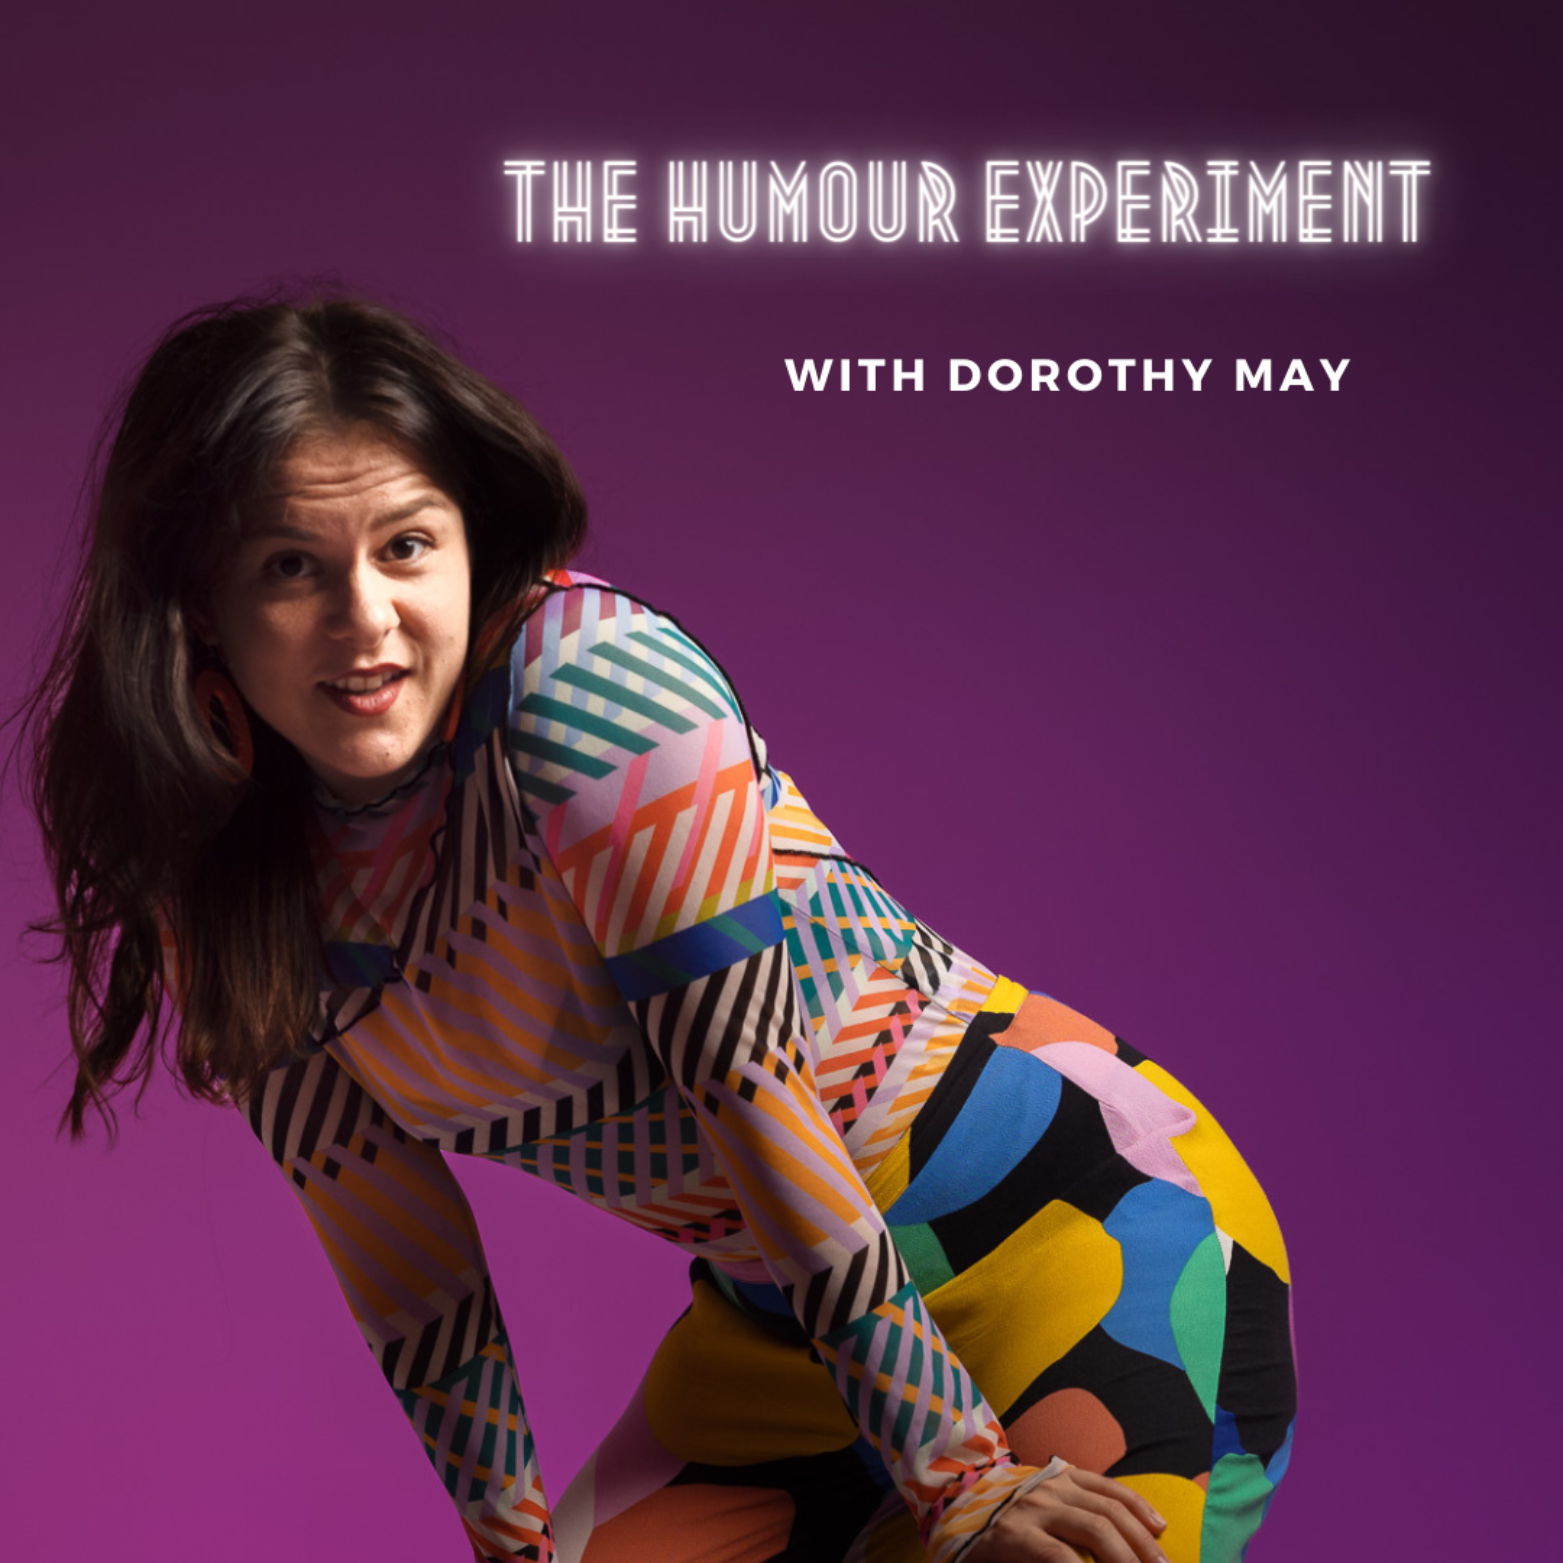 The Humour Experiment